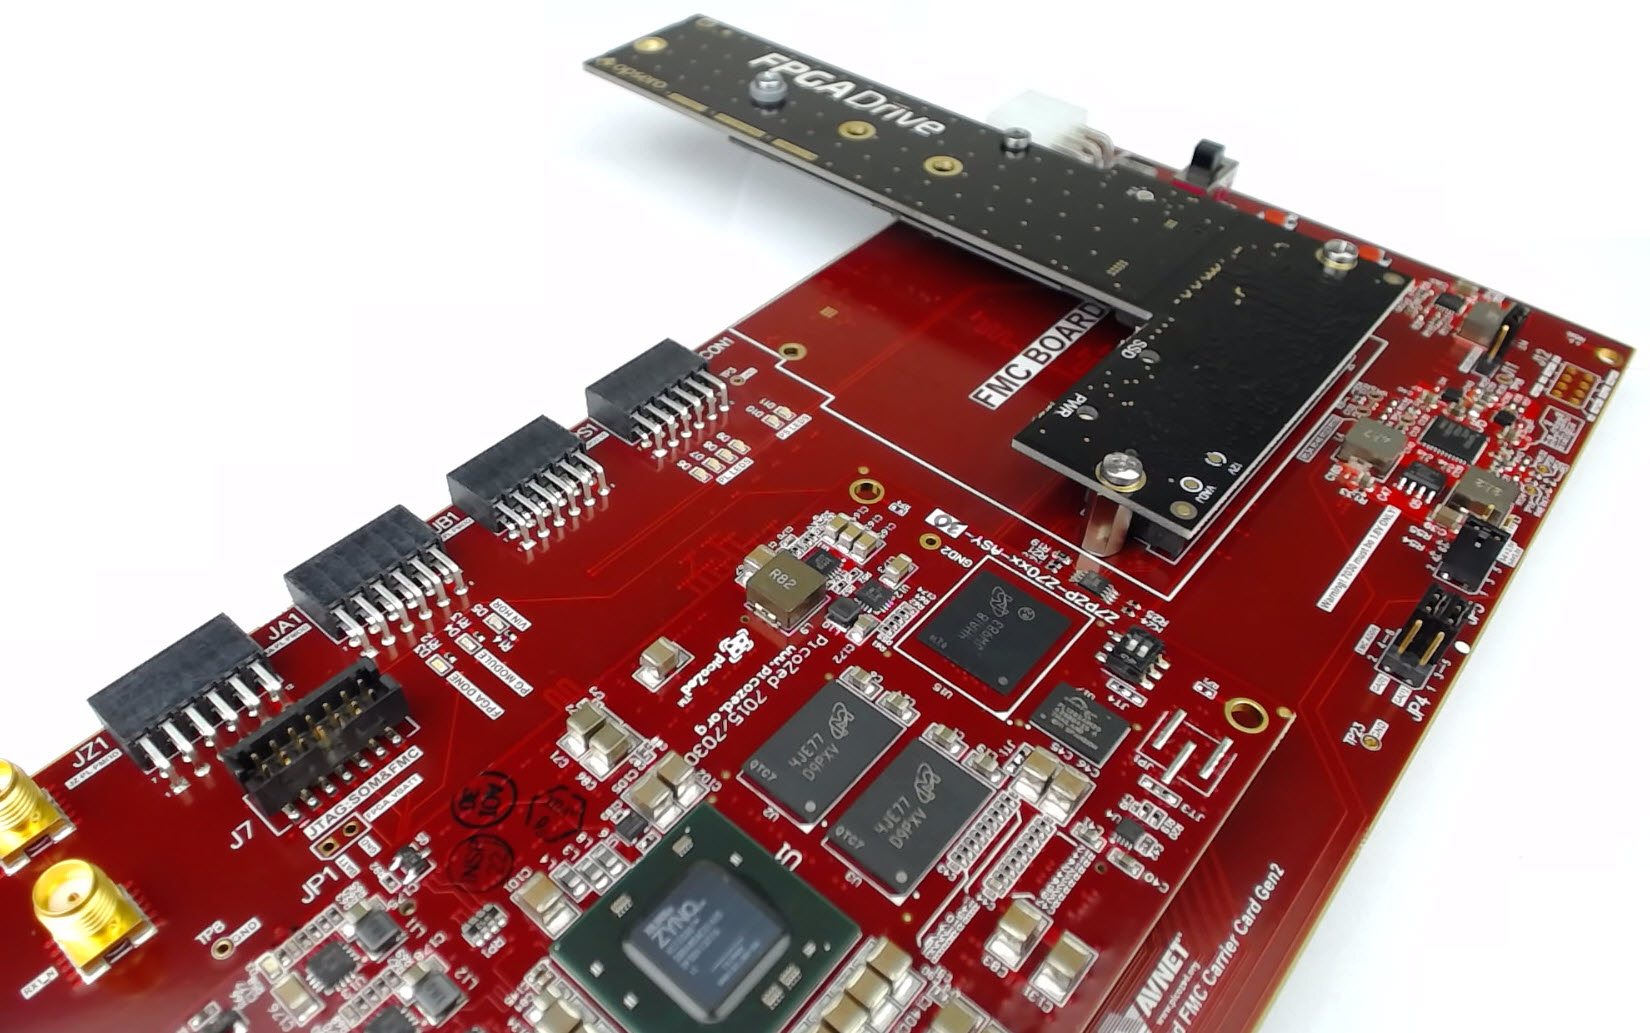 Connecting an SSD to an FPGA running PetaLinux